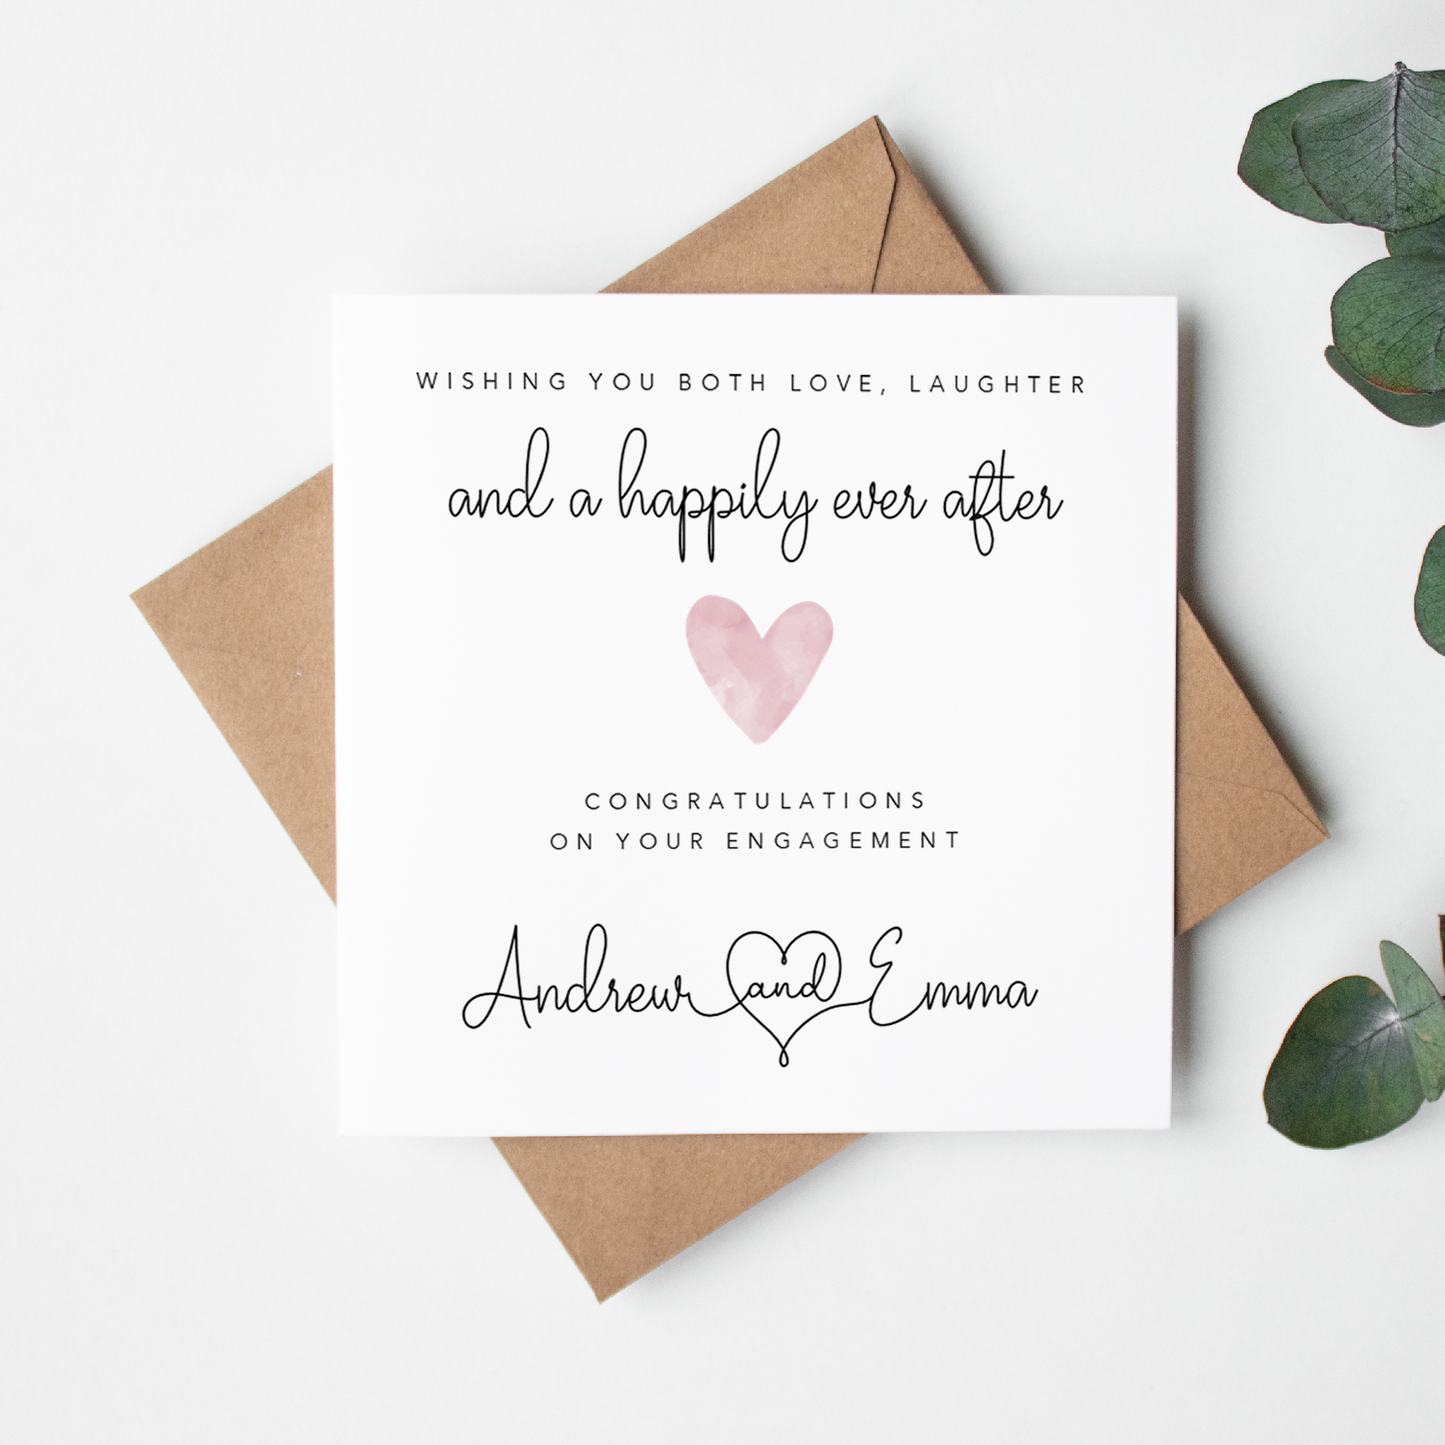 'Wishing you love, laughter and a happily ever after' Engagement Card